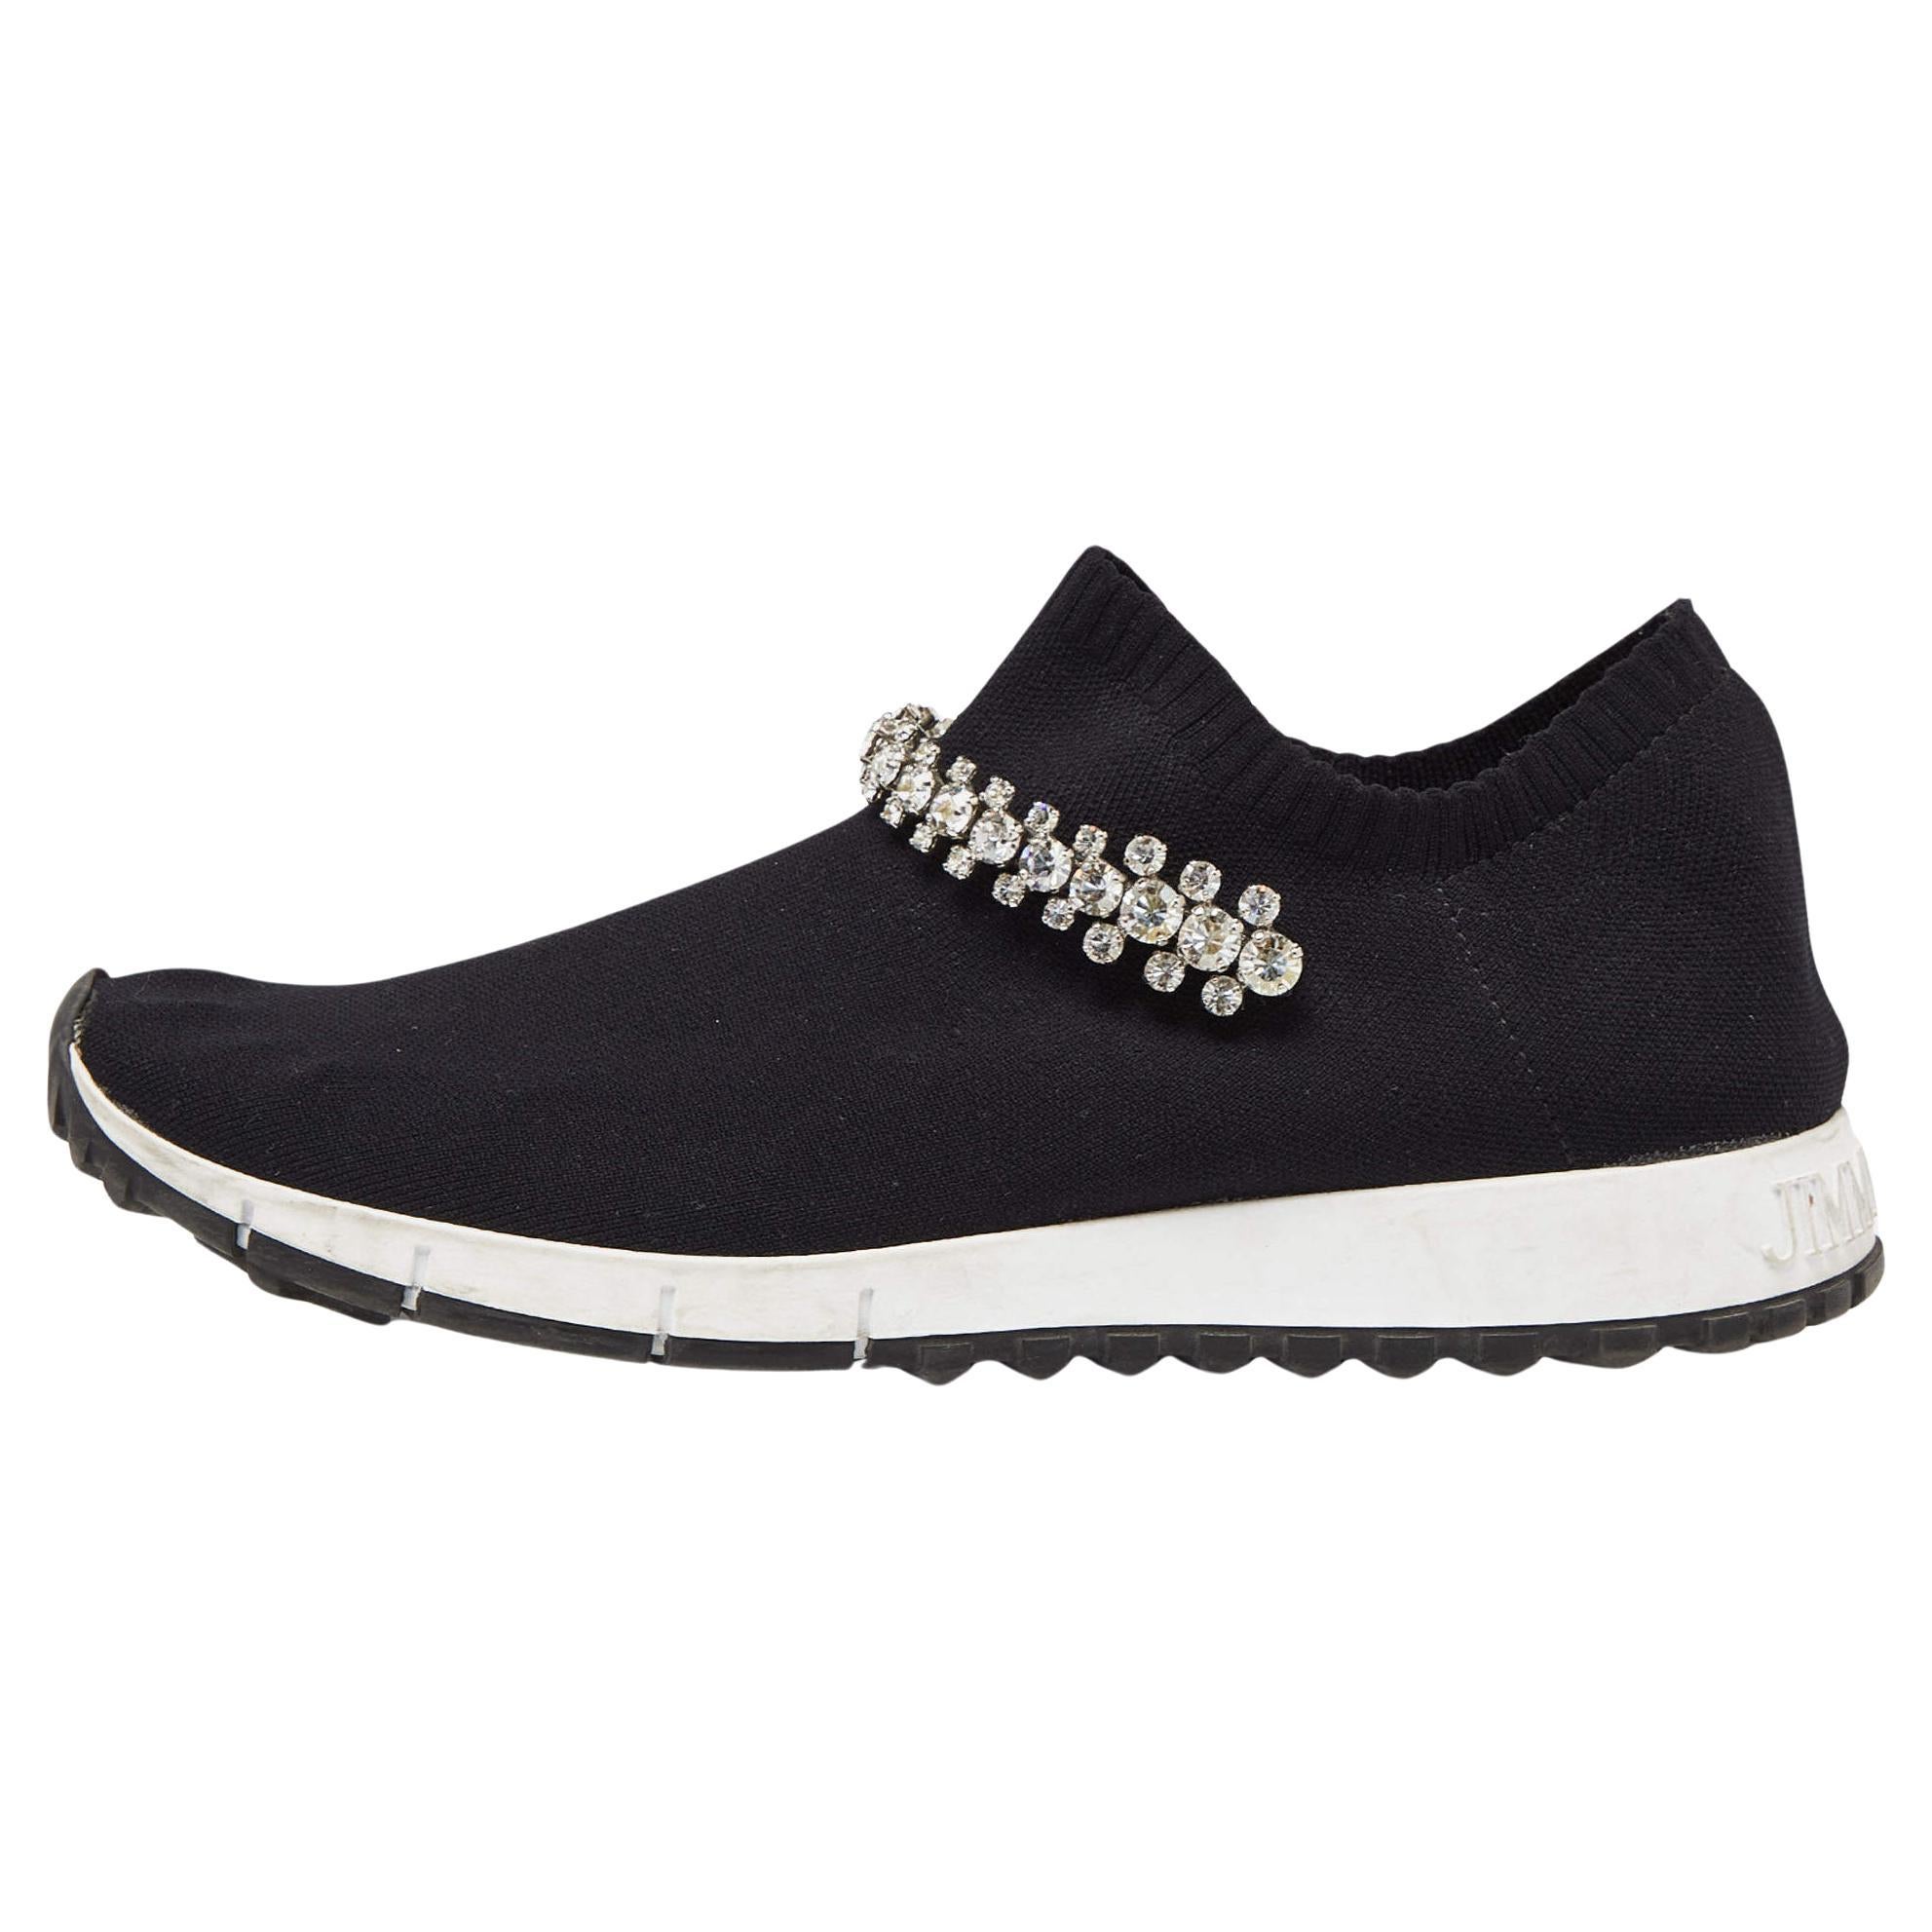 Jimmy Choo Black Knit Fabric Crystal Embellished Verona Sneakers Size 38 For Sale